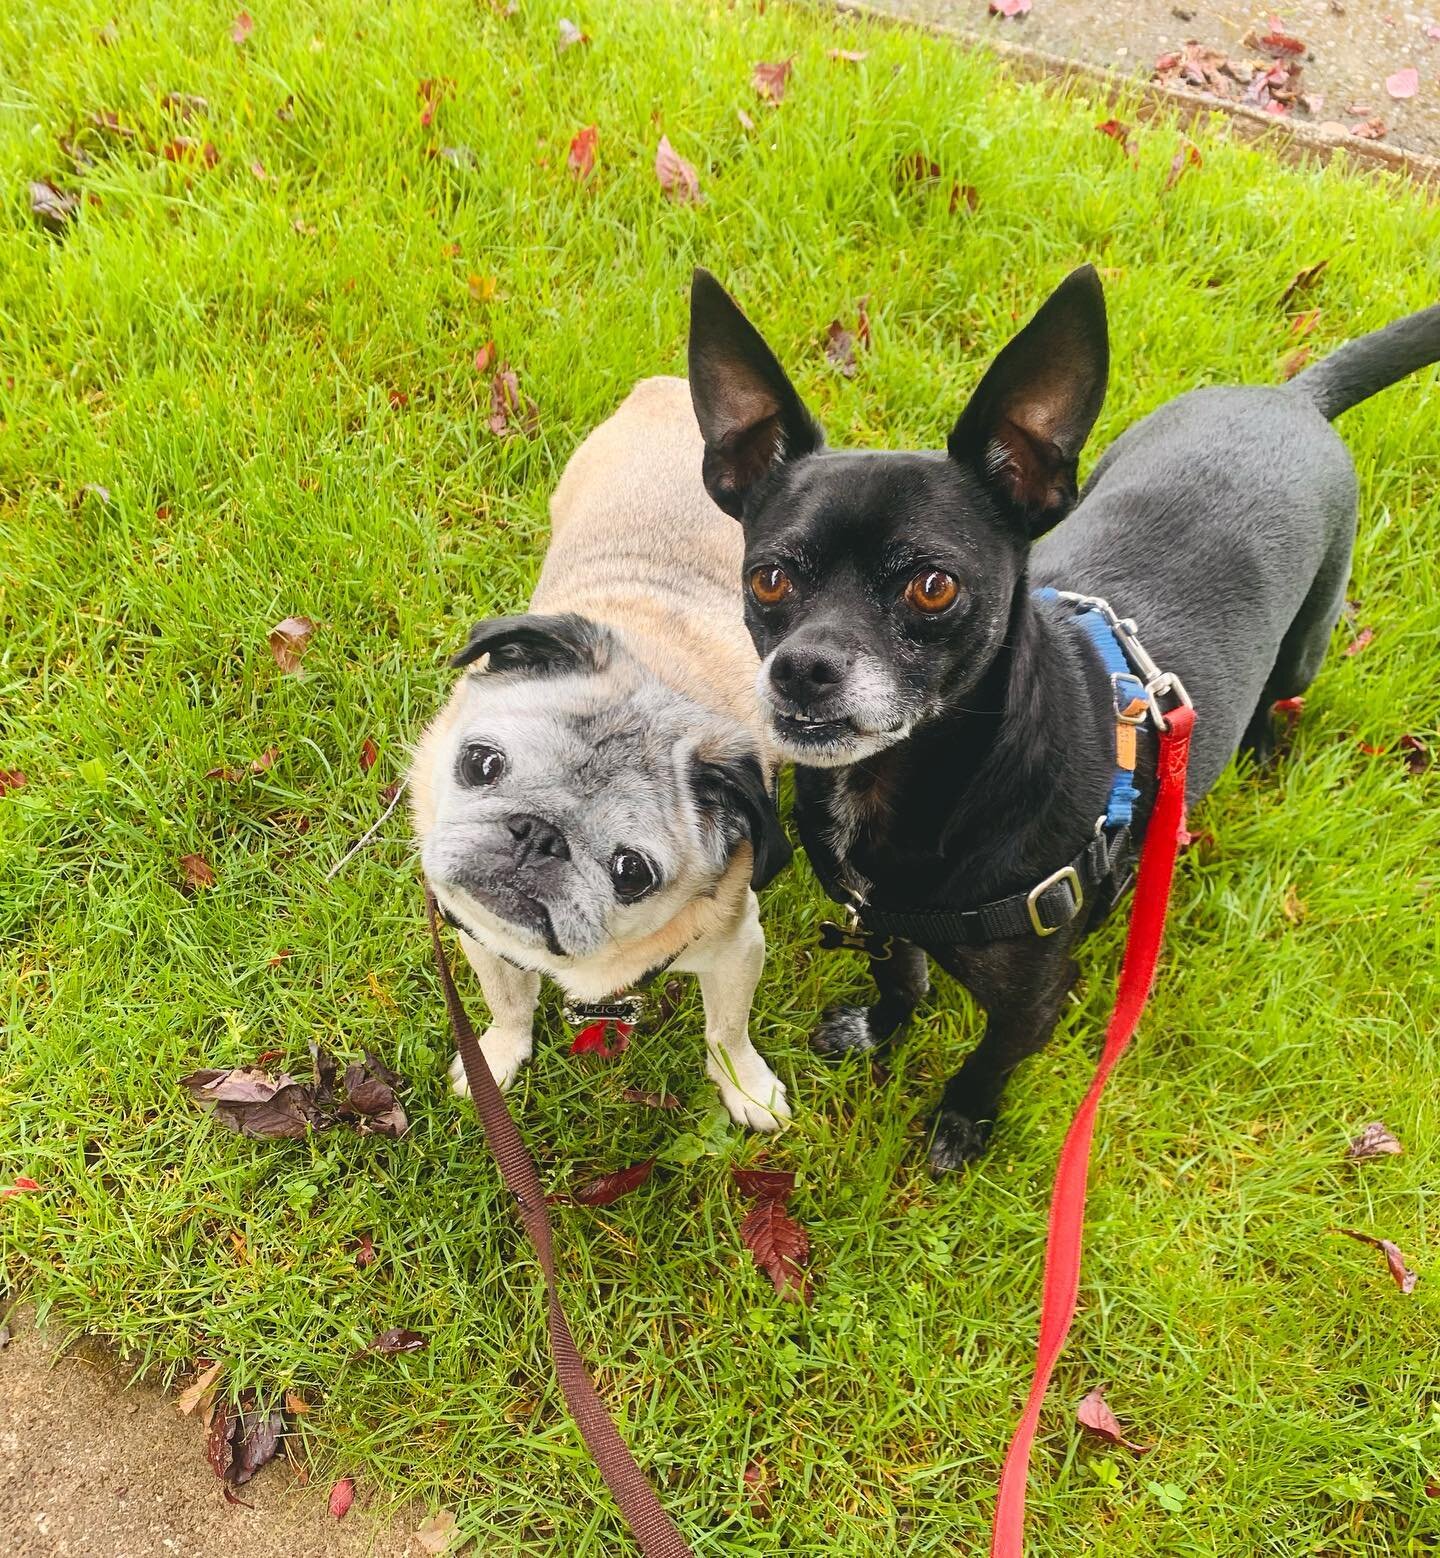 The cutest little duo around town - love these two so stinking much! 
.
.
.
#portlandoregon #portland #pdx #portlandpets #portlandpetsitter #portlanddogsitter #portlanddogwalkers #portlanddogs #portlanddog #portlanddogwalker #portlanddogadventures #p